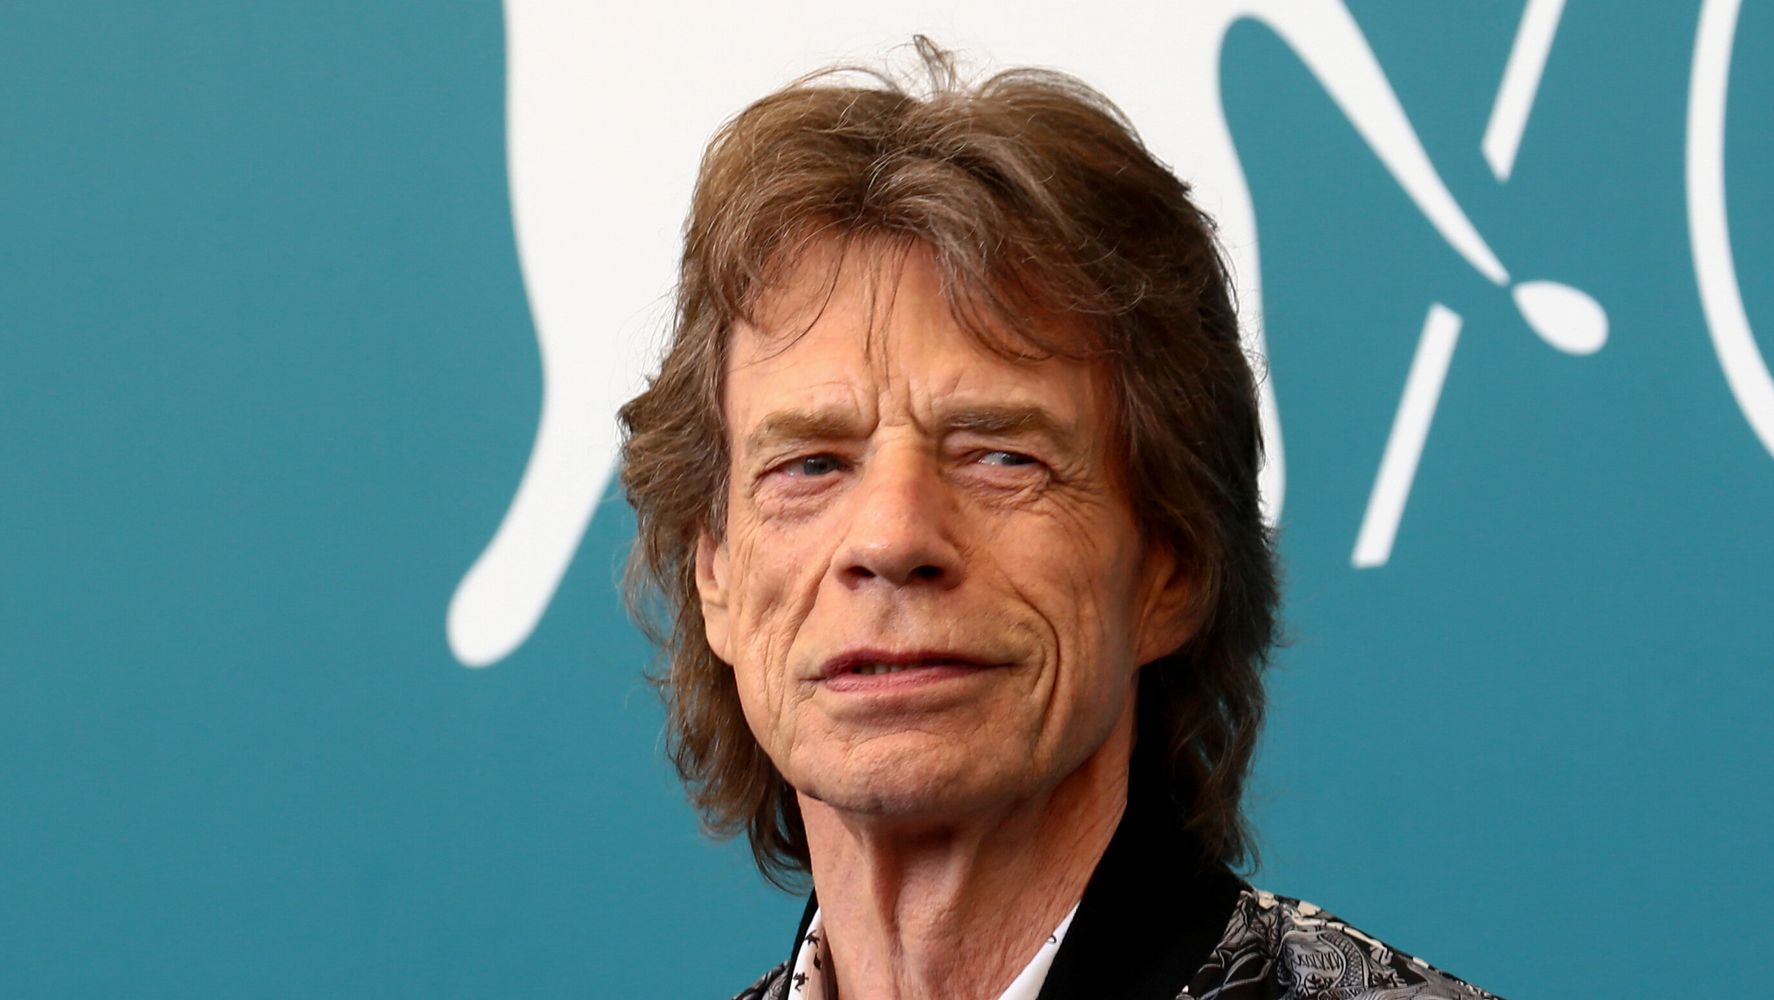 Mick Jagger describes the problem with anti-Vaxxers: “rational thinking doesn’t work”